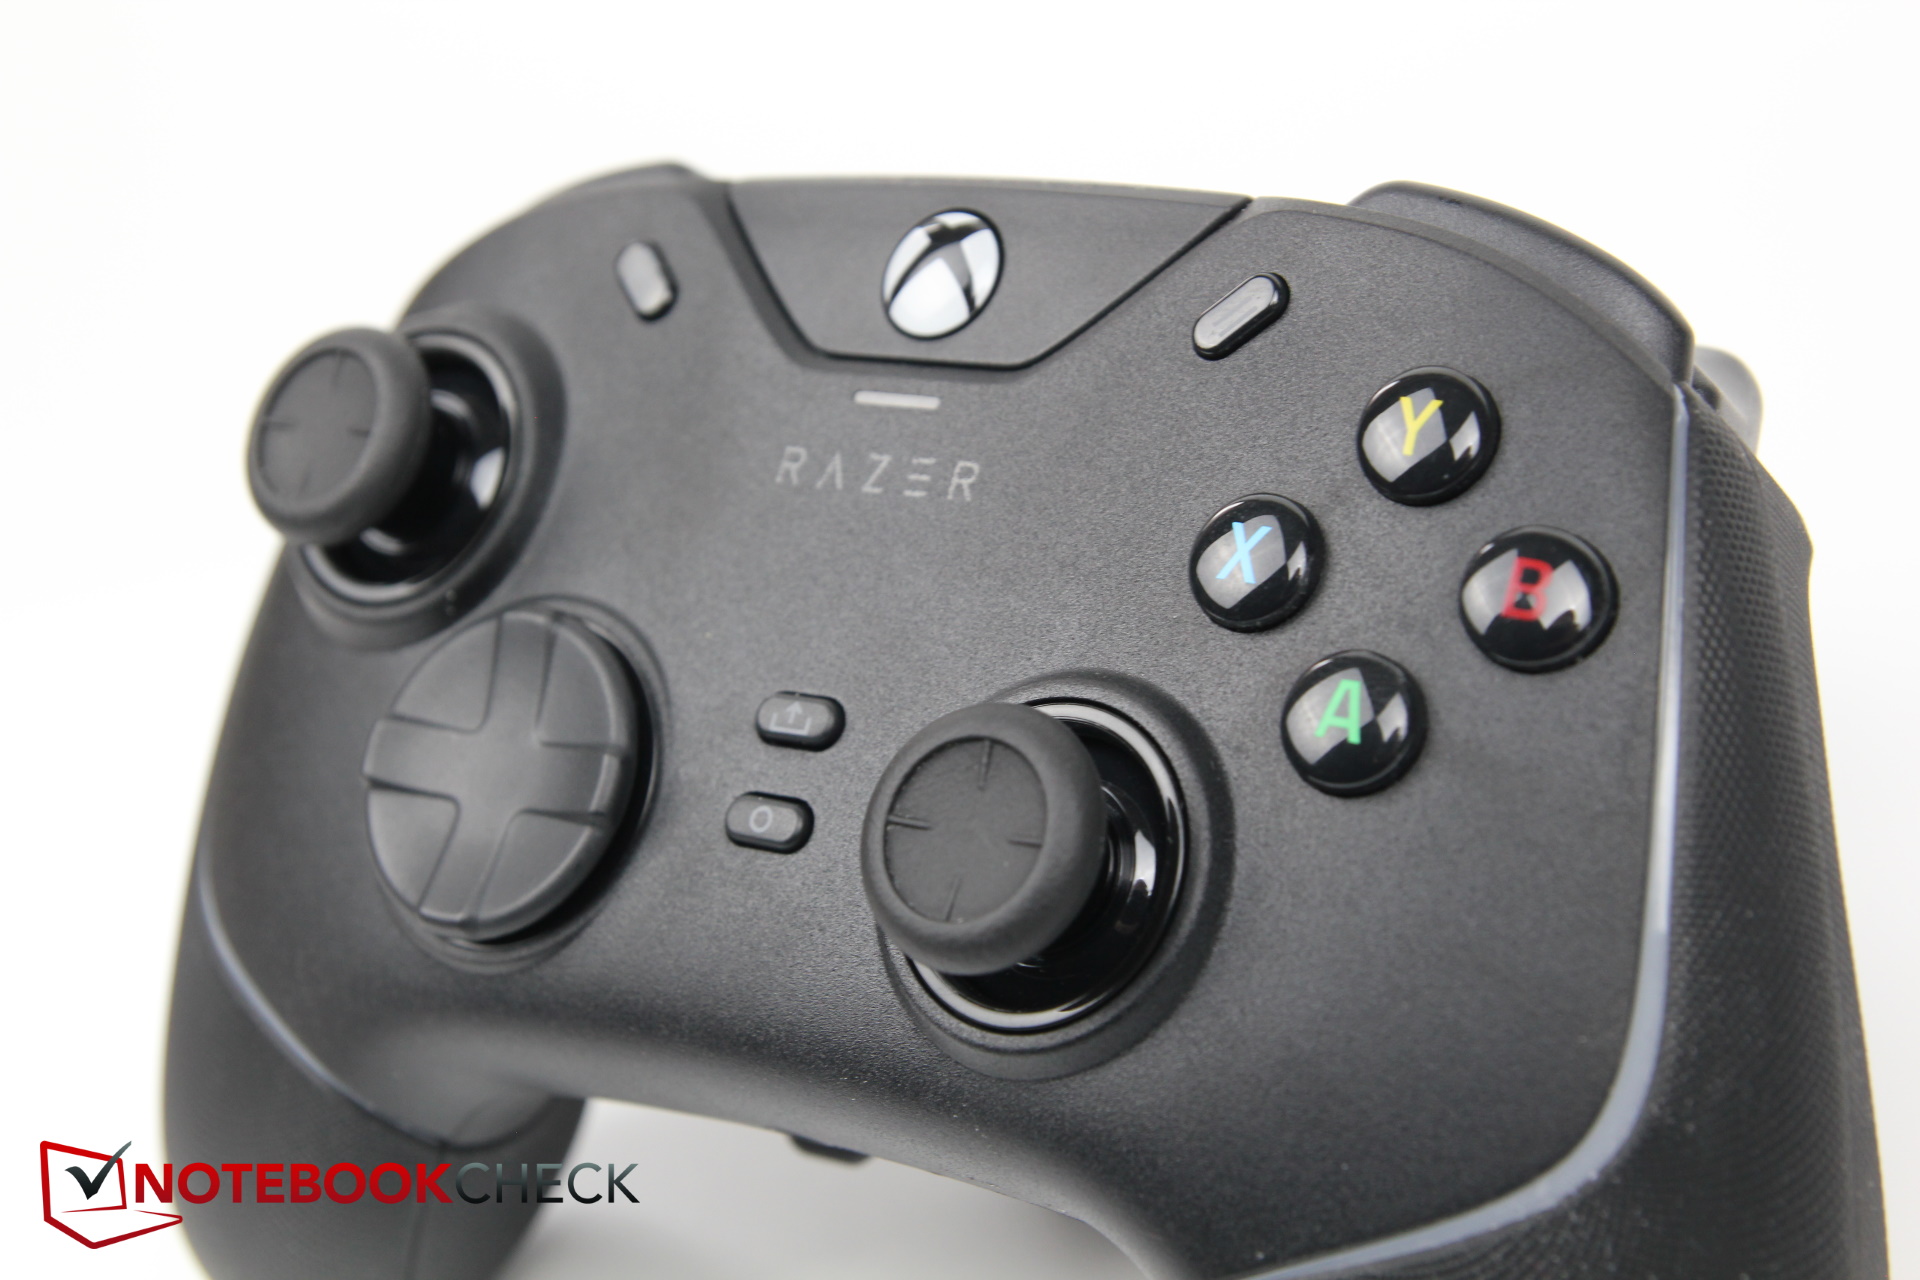 Razer Wolverine Chroma hands-on: gamepad with mechanical buttons - NotebookCheck.net